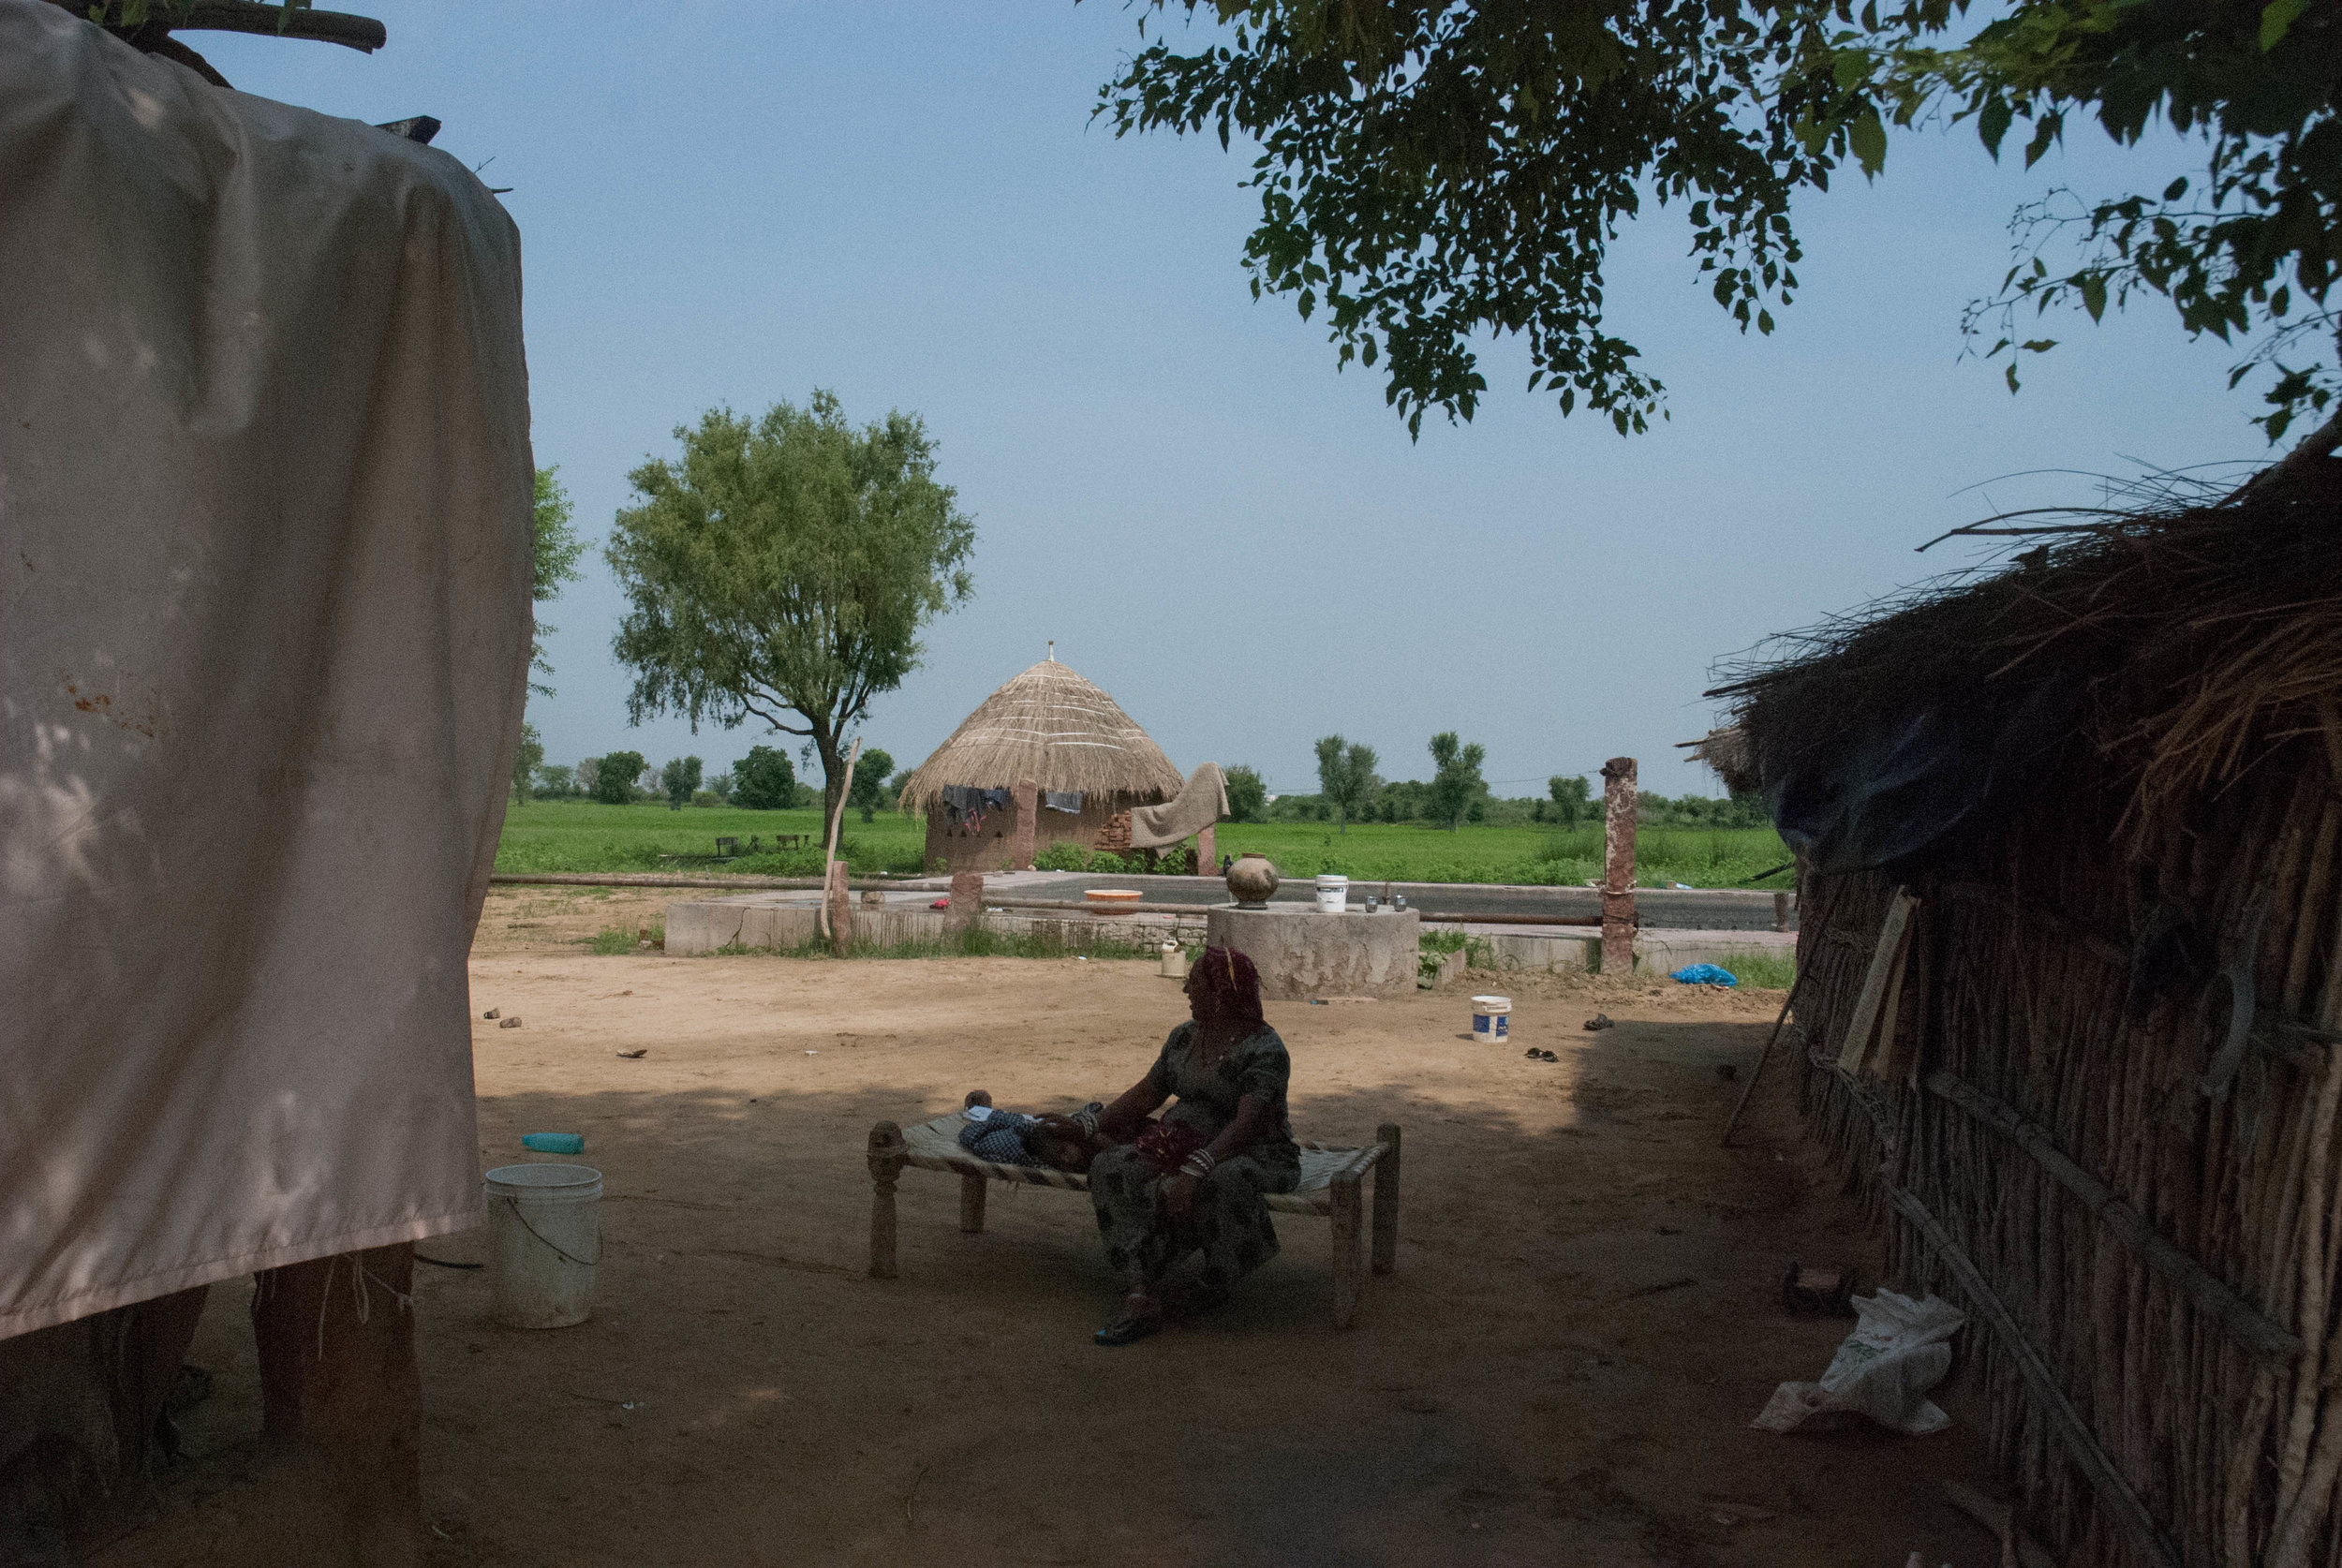  At the  dhani  (desert village) of the Siddh family, their grandma rests with her sleeping grand-daughter during the afternoon heat.  Like many village households that populate the rural landscape of Bikaner, this family is dependent on agriculture,